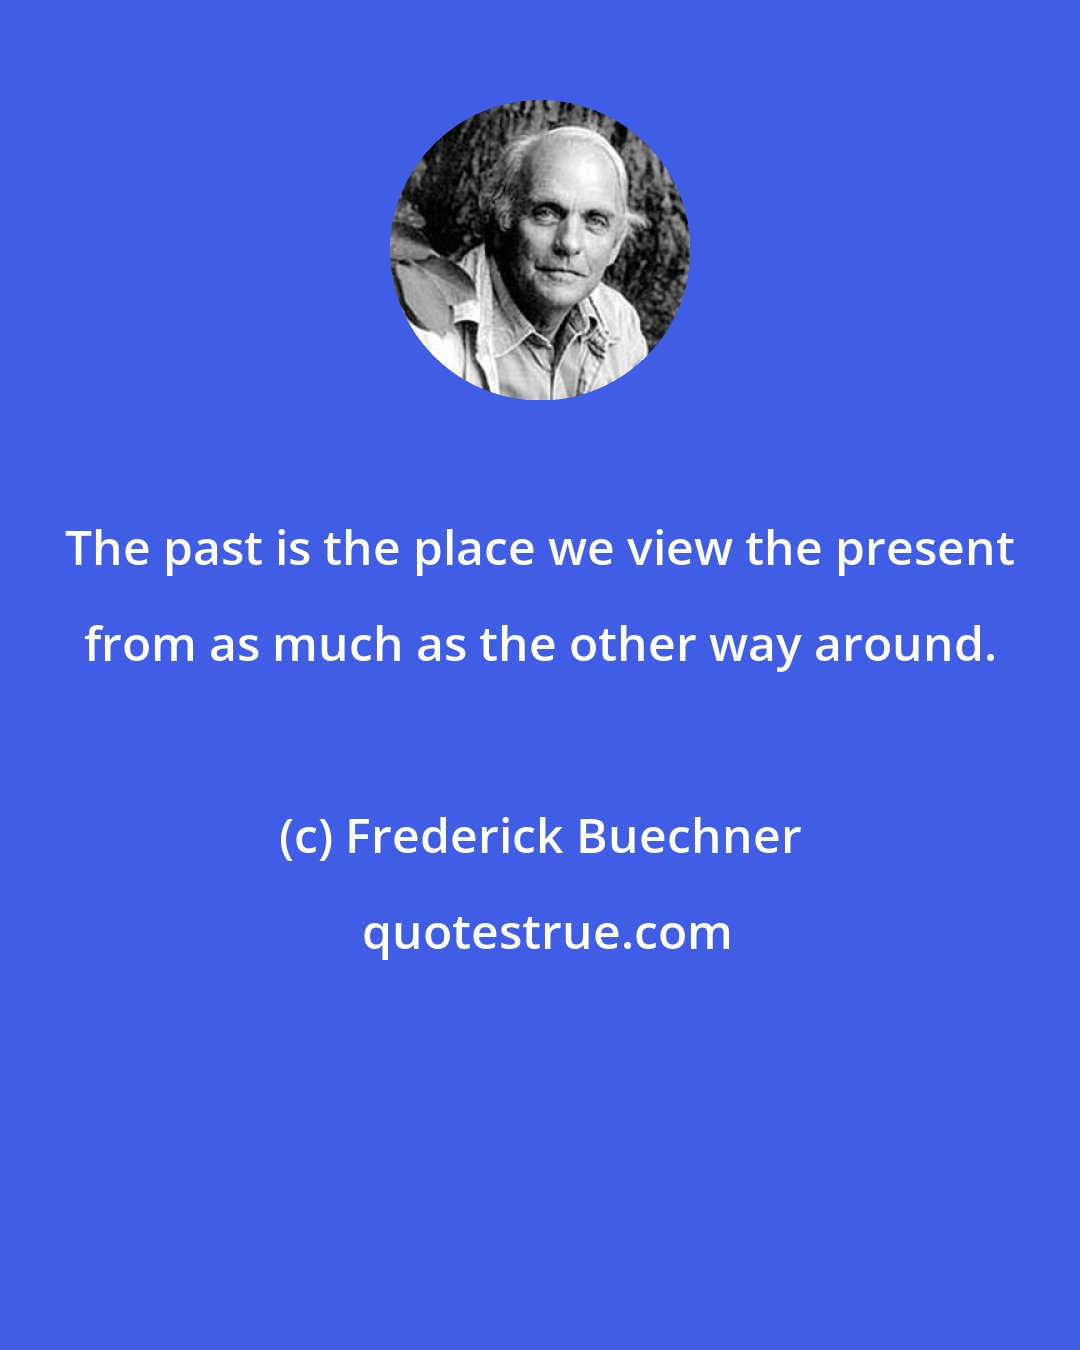 Frederick Buechner: The past is the place we view the present from as much as the other way around.